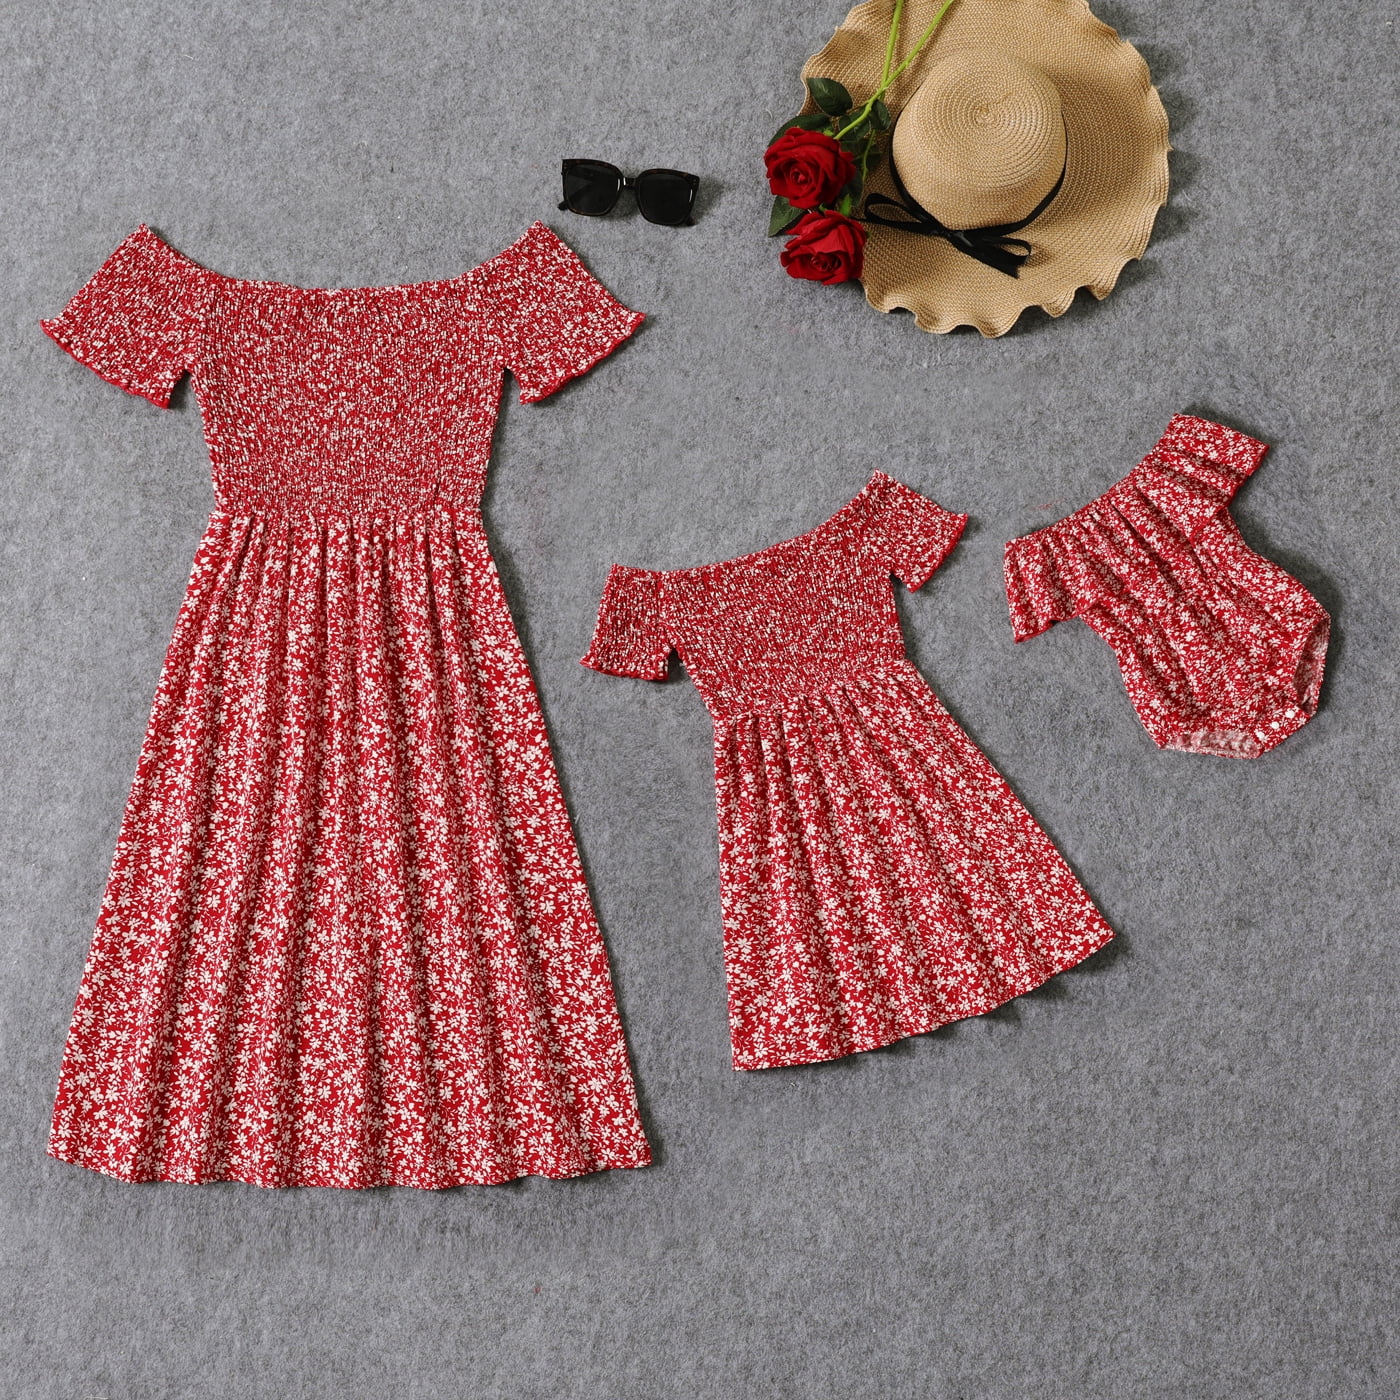 DREAM SALE  BABY GIRL CREAM RED  LINED TRADITIONAL DRESS OR REBORN 